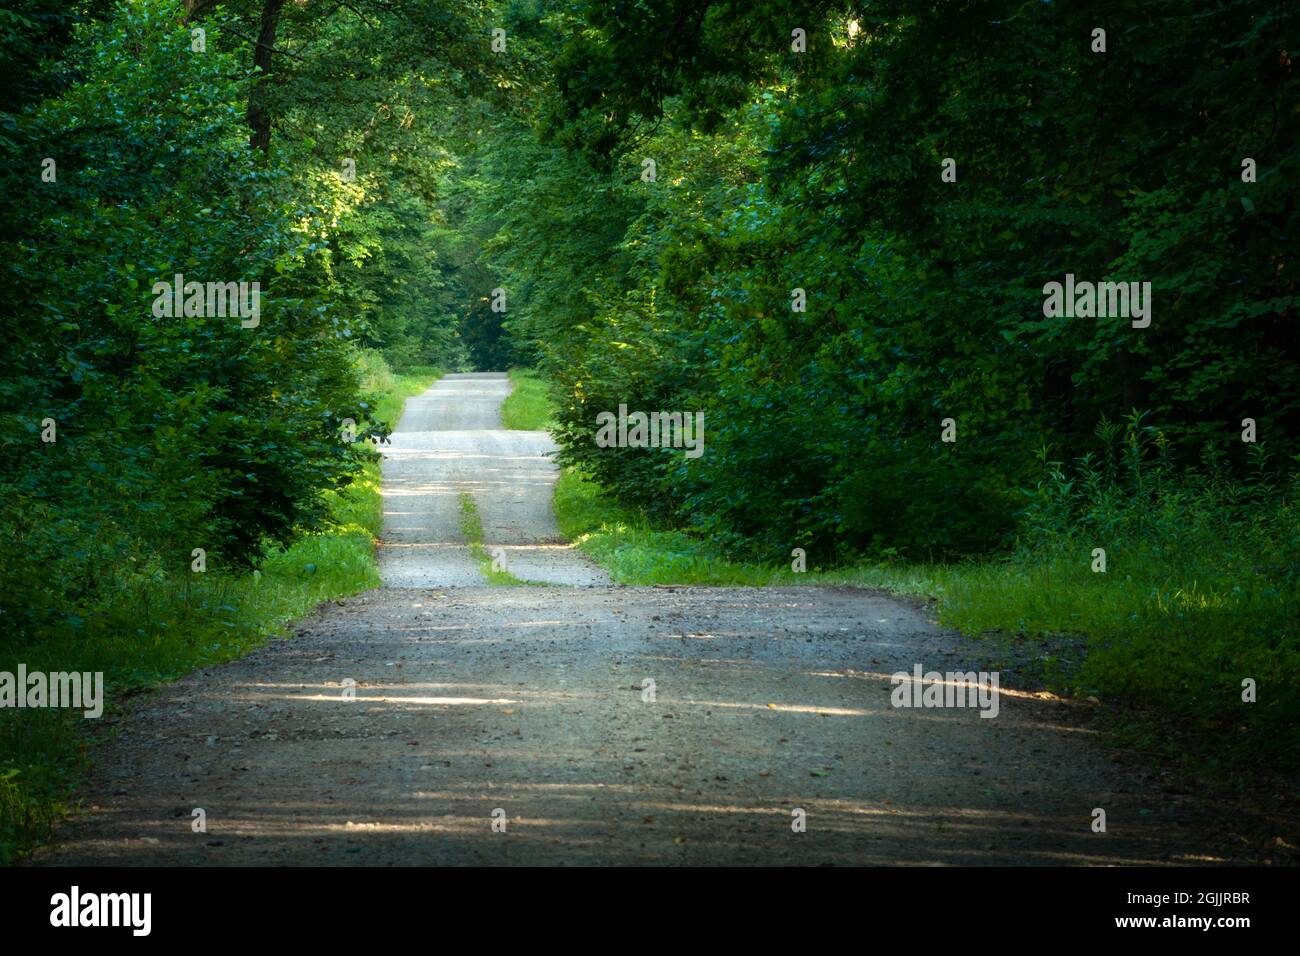 Hilly gravel road through green dense forest, summer view Stock Photo